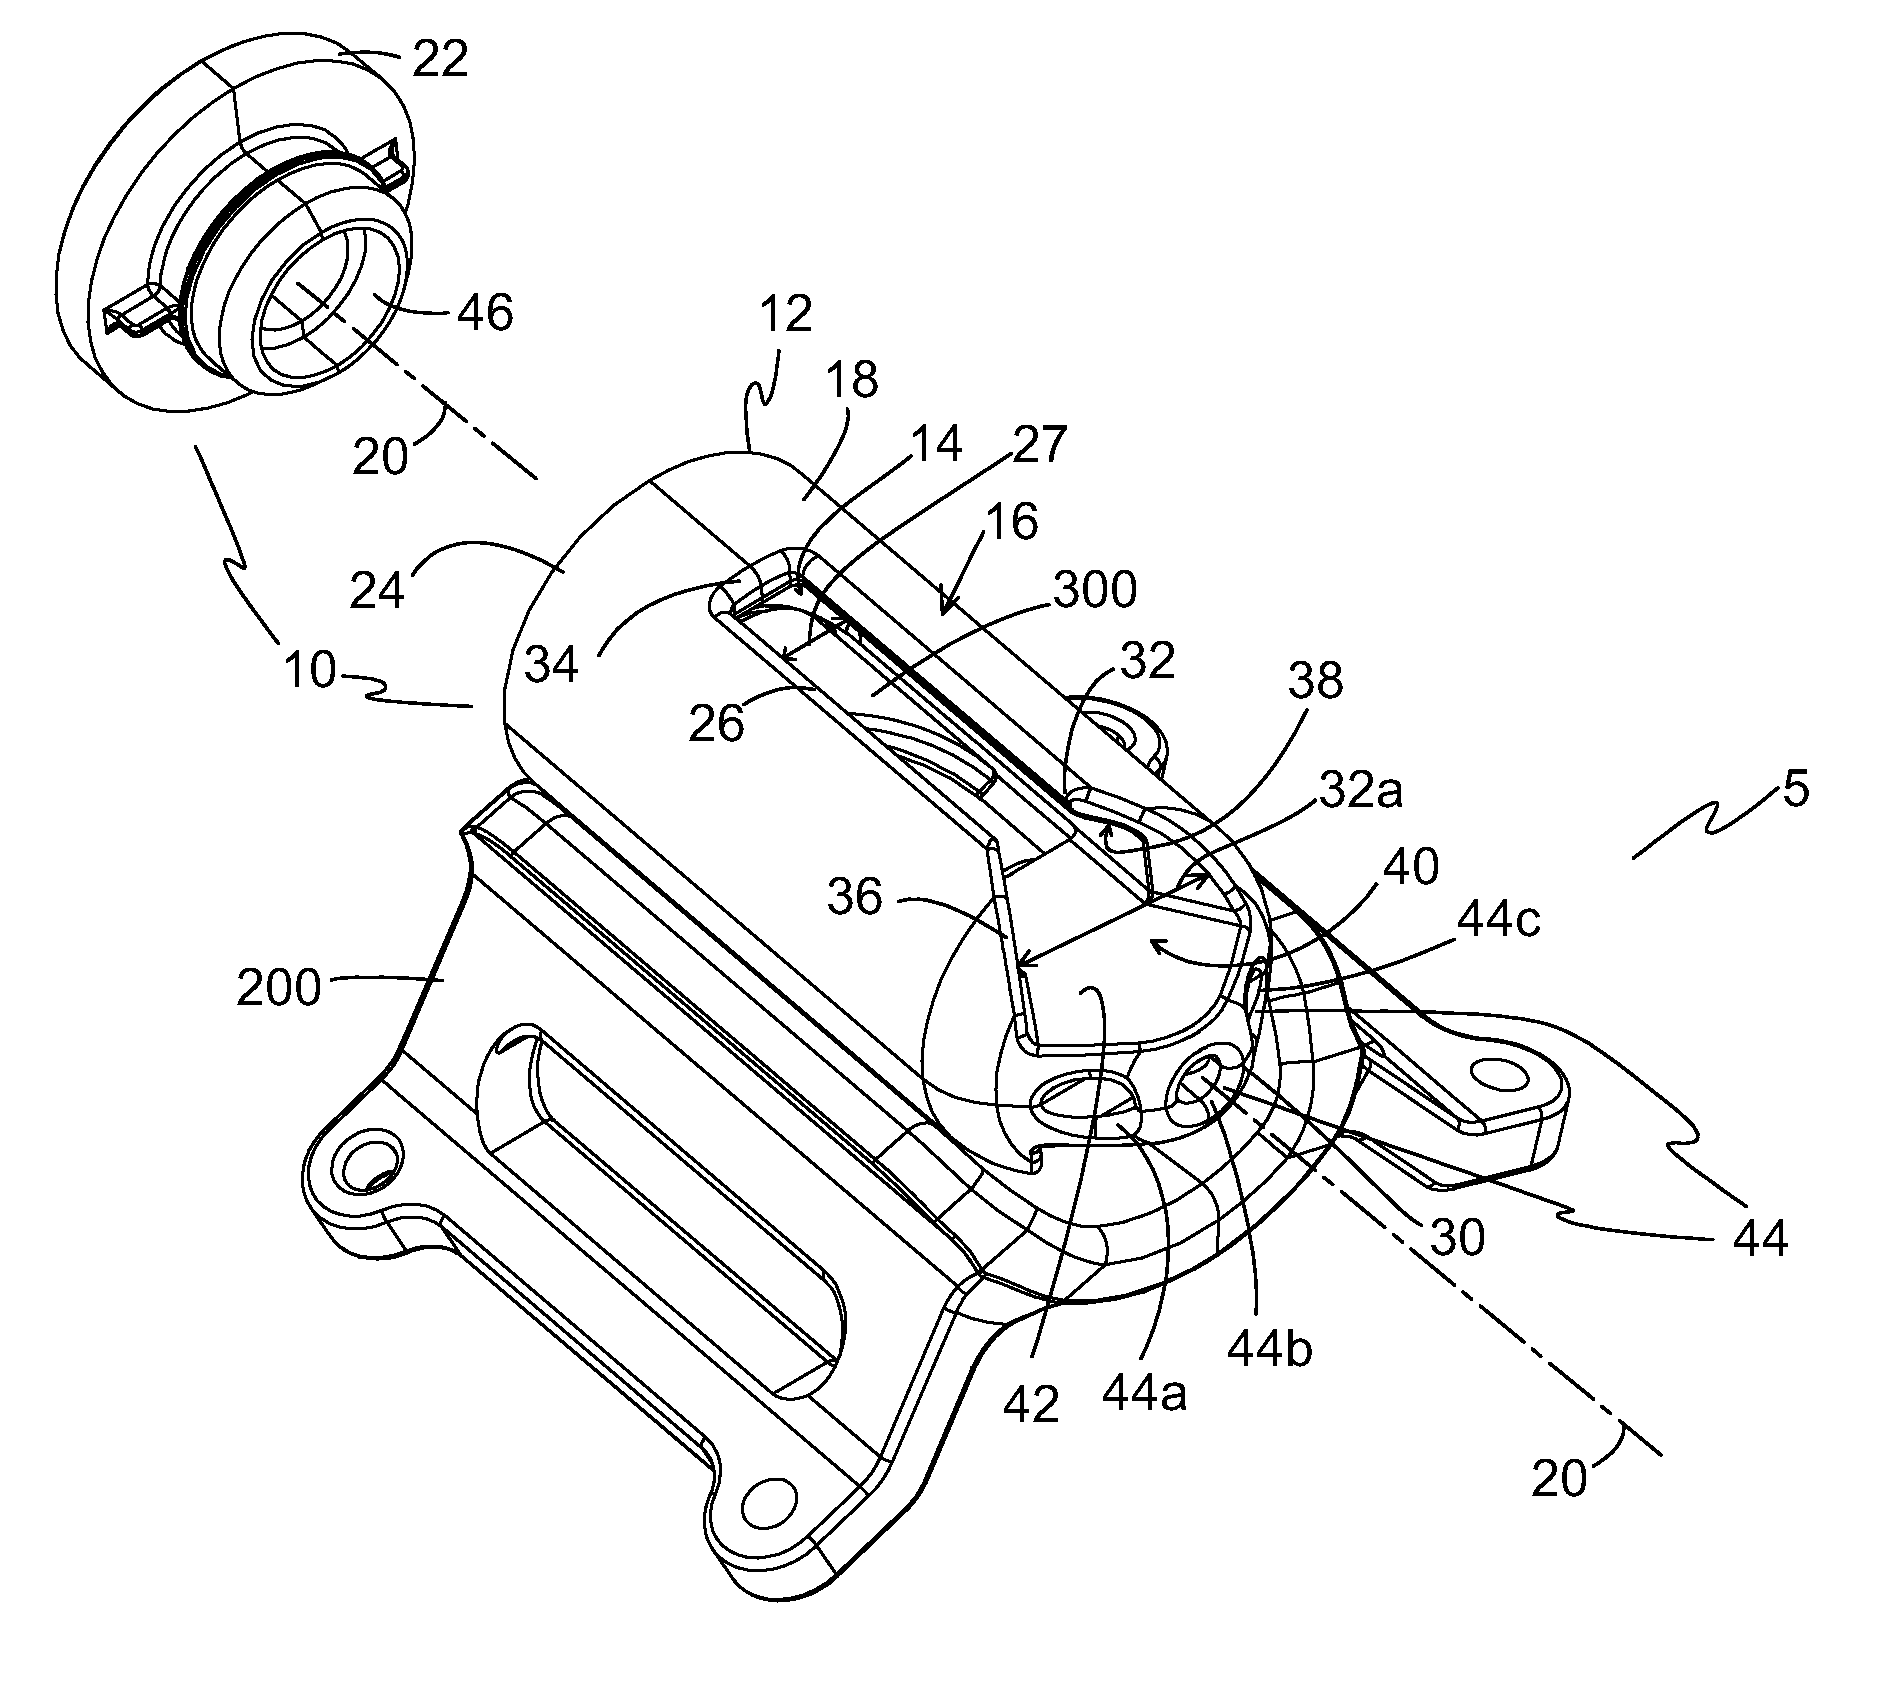 Attachment system for hand-held tools